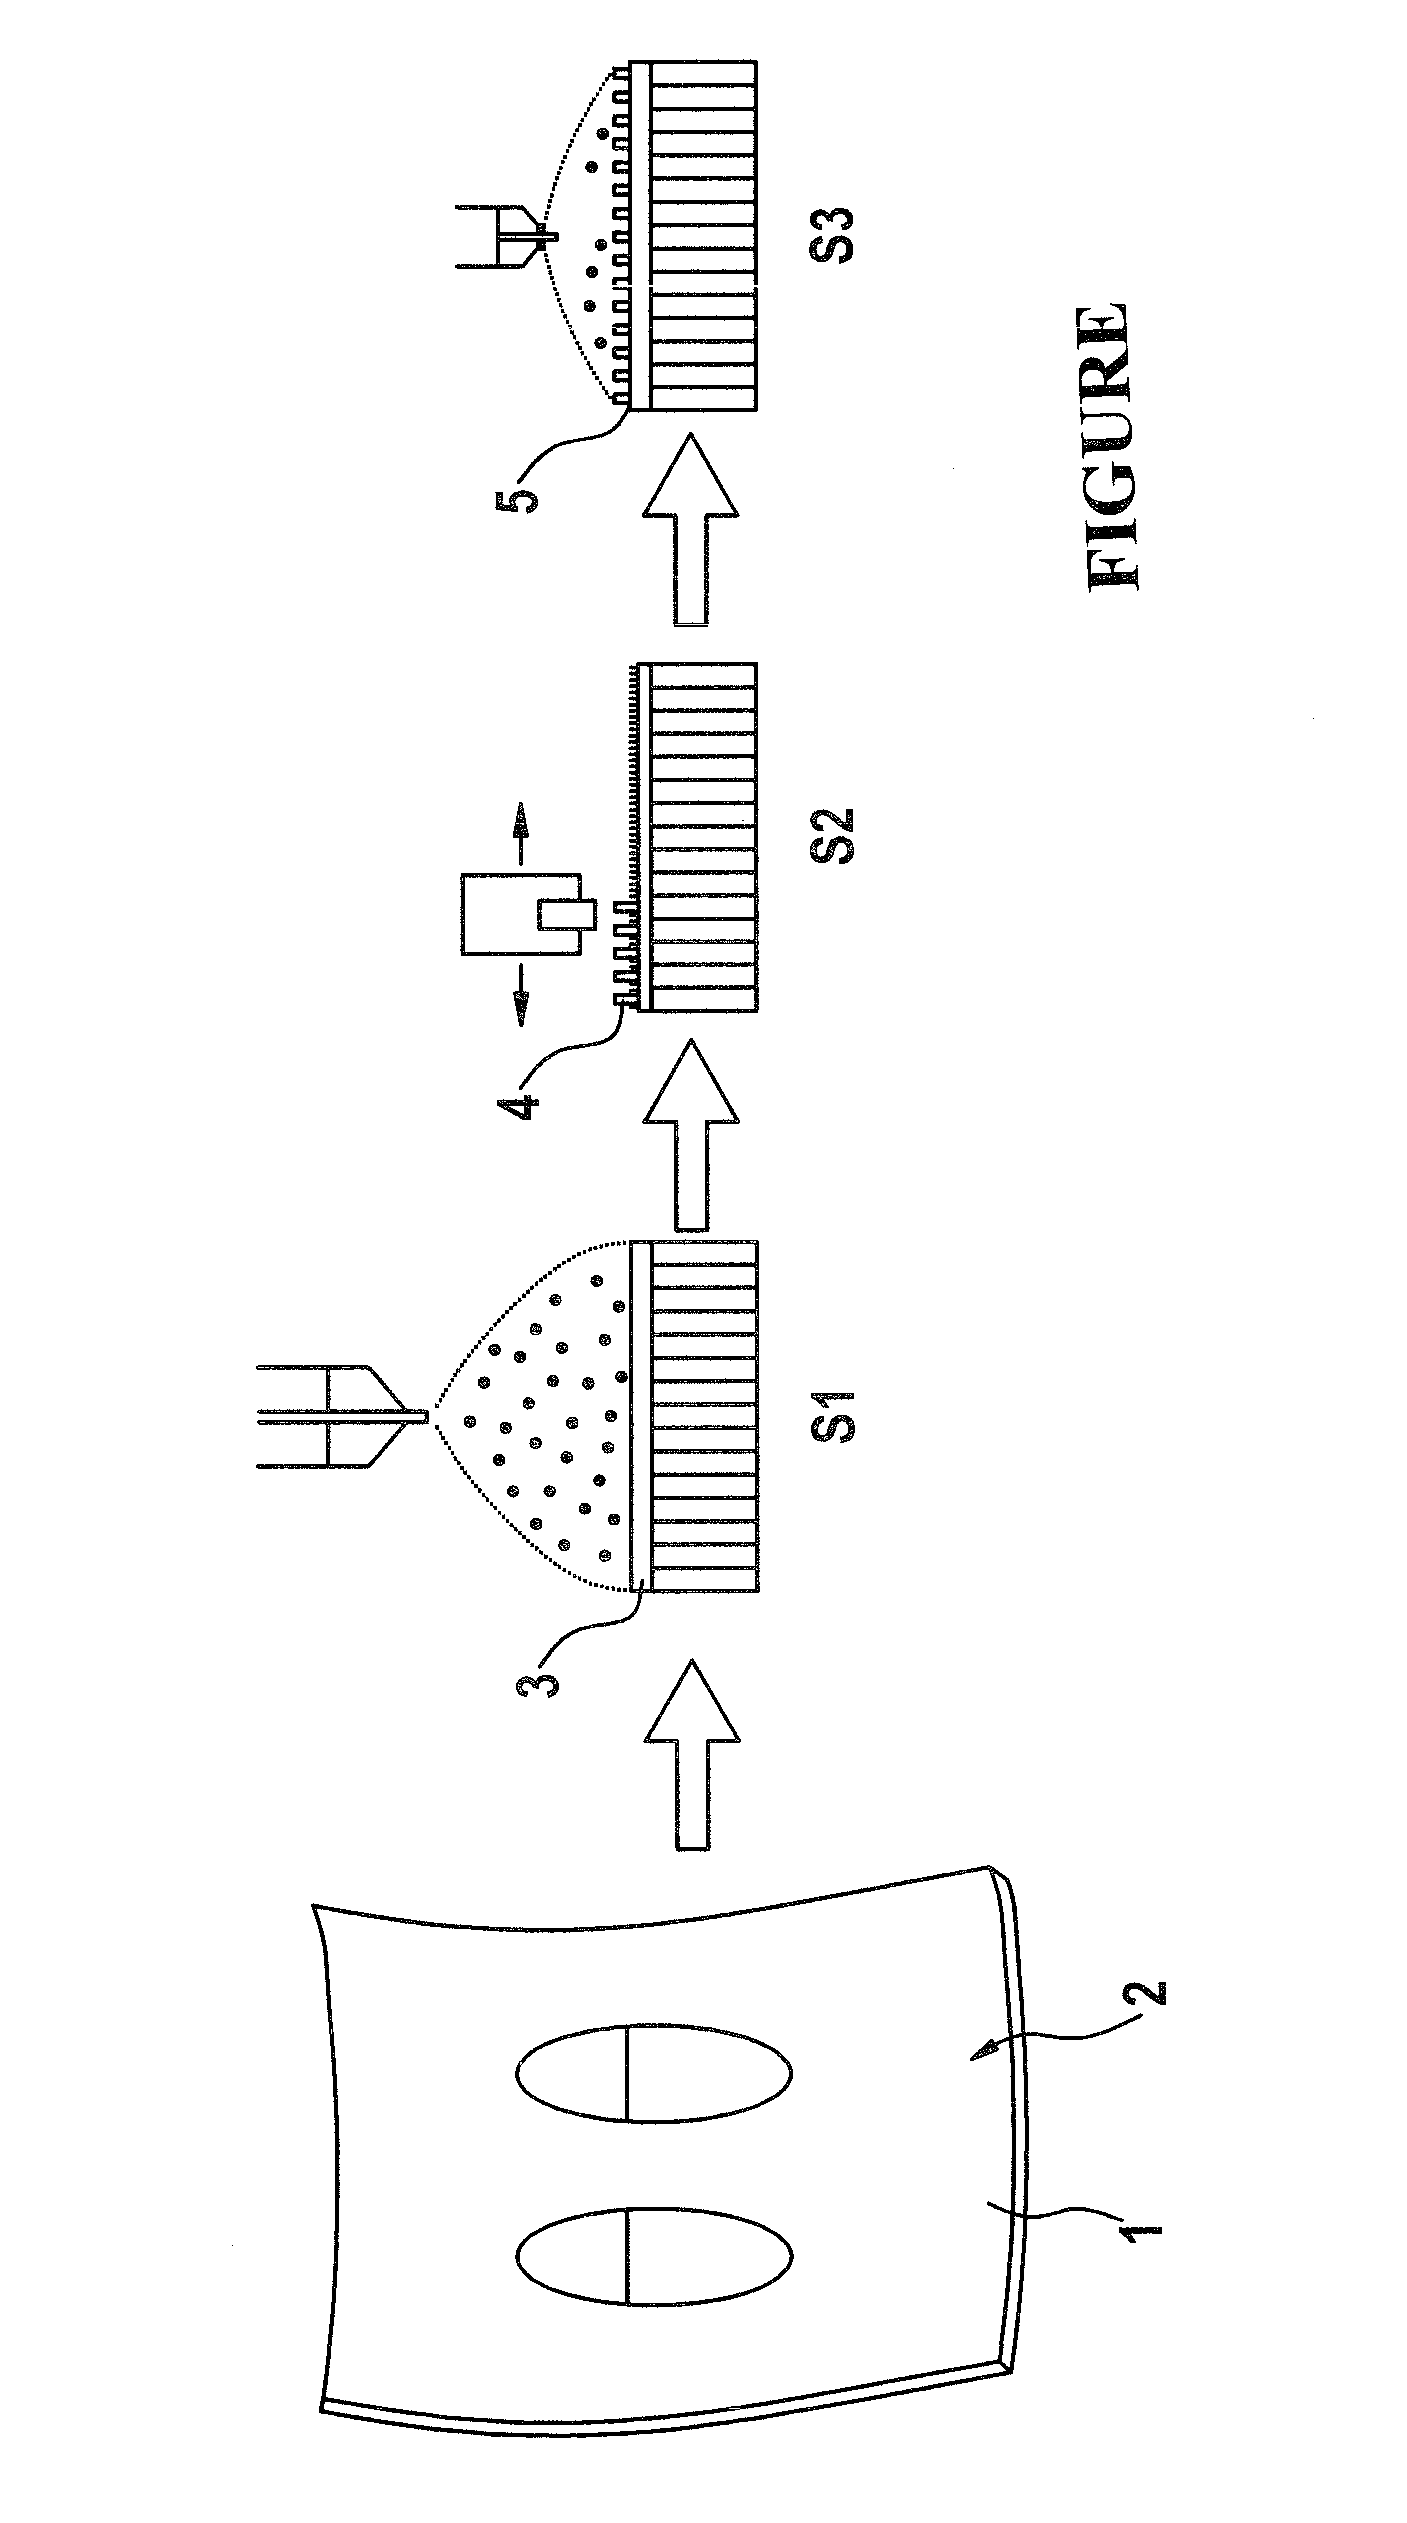 Component having coating and coating method